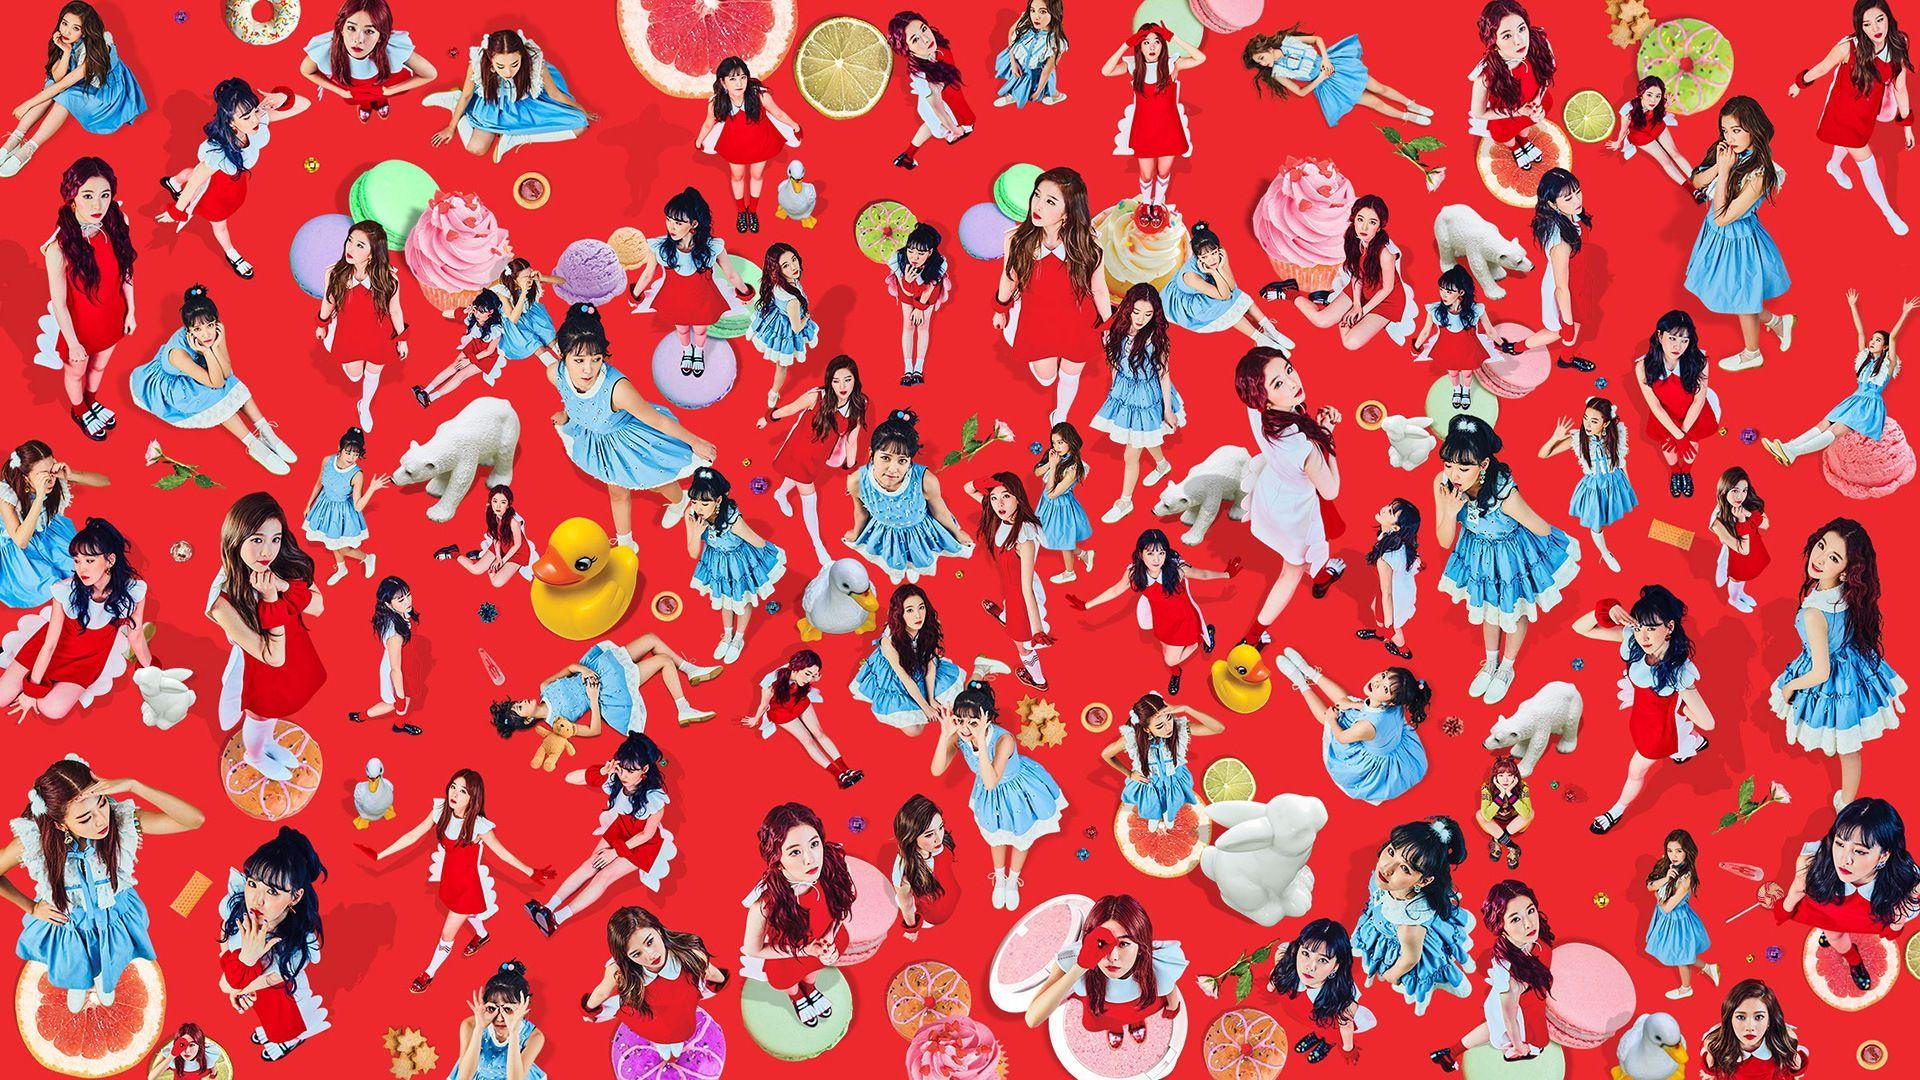 Red Velvet Fanart Wallpaper It s where your interests image discovered ...